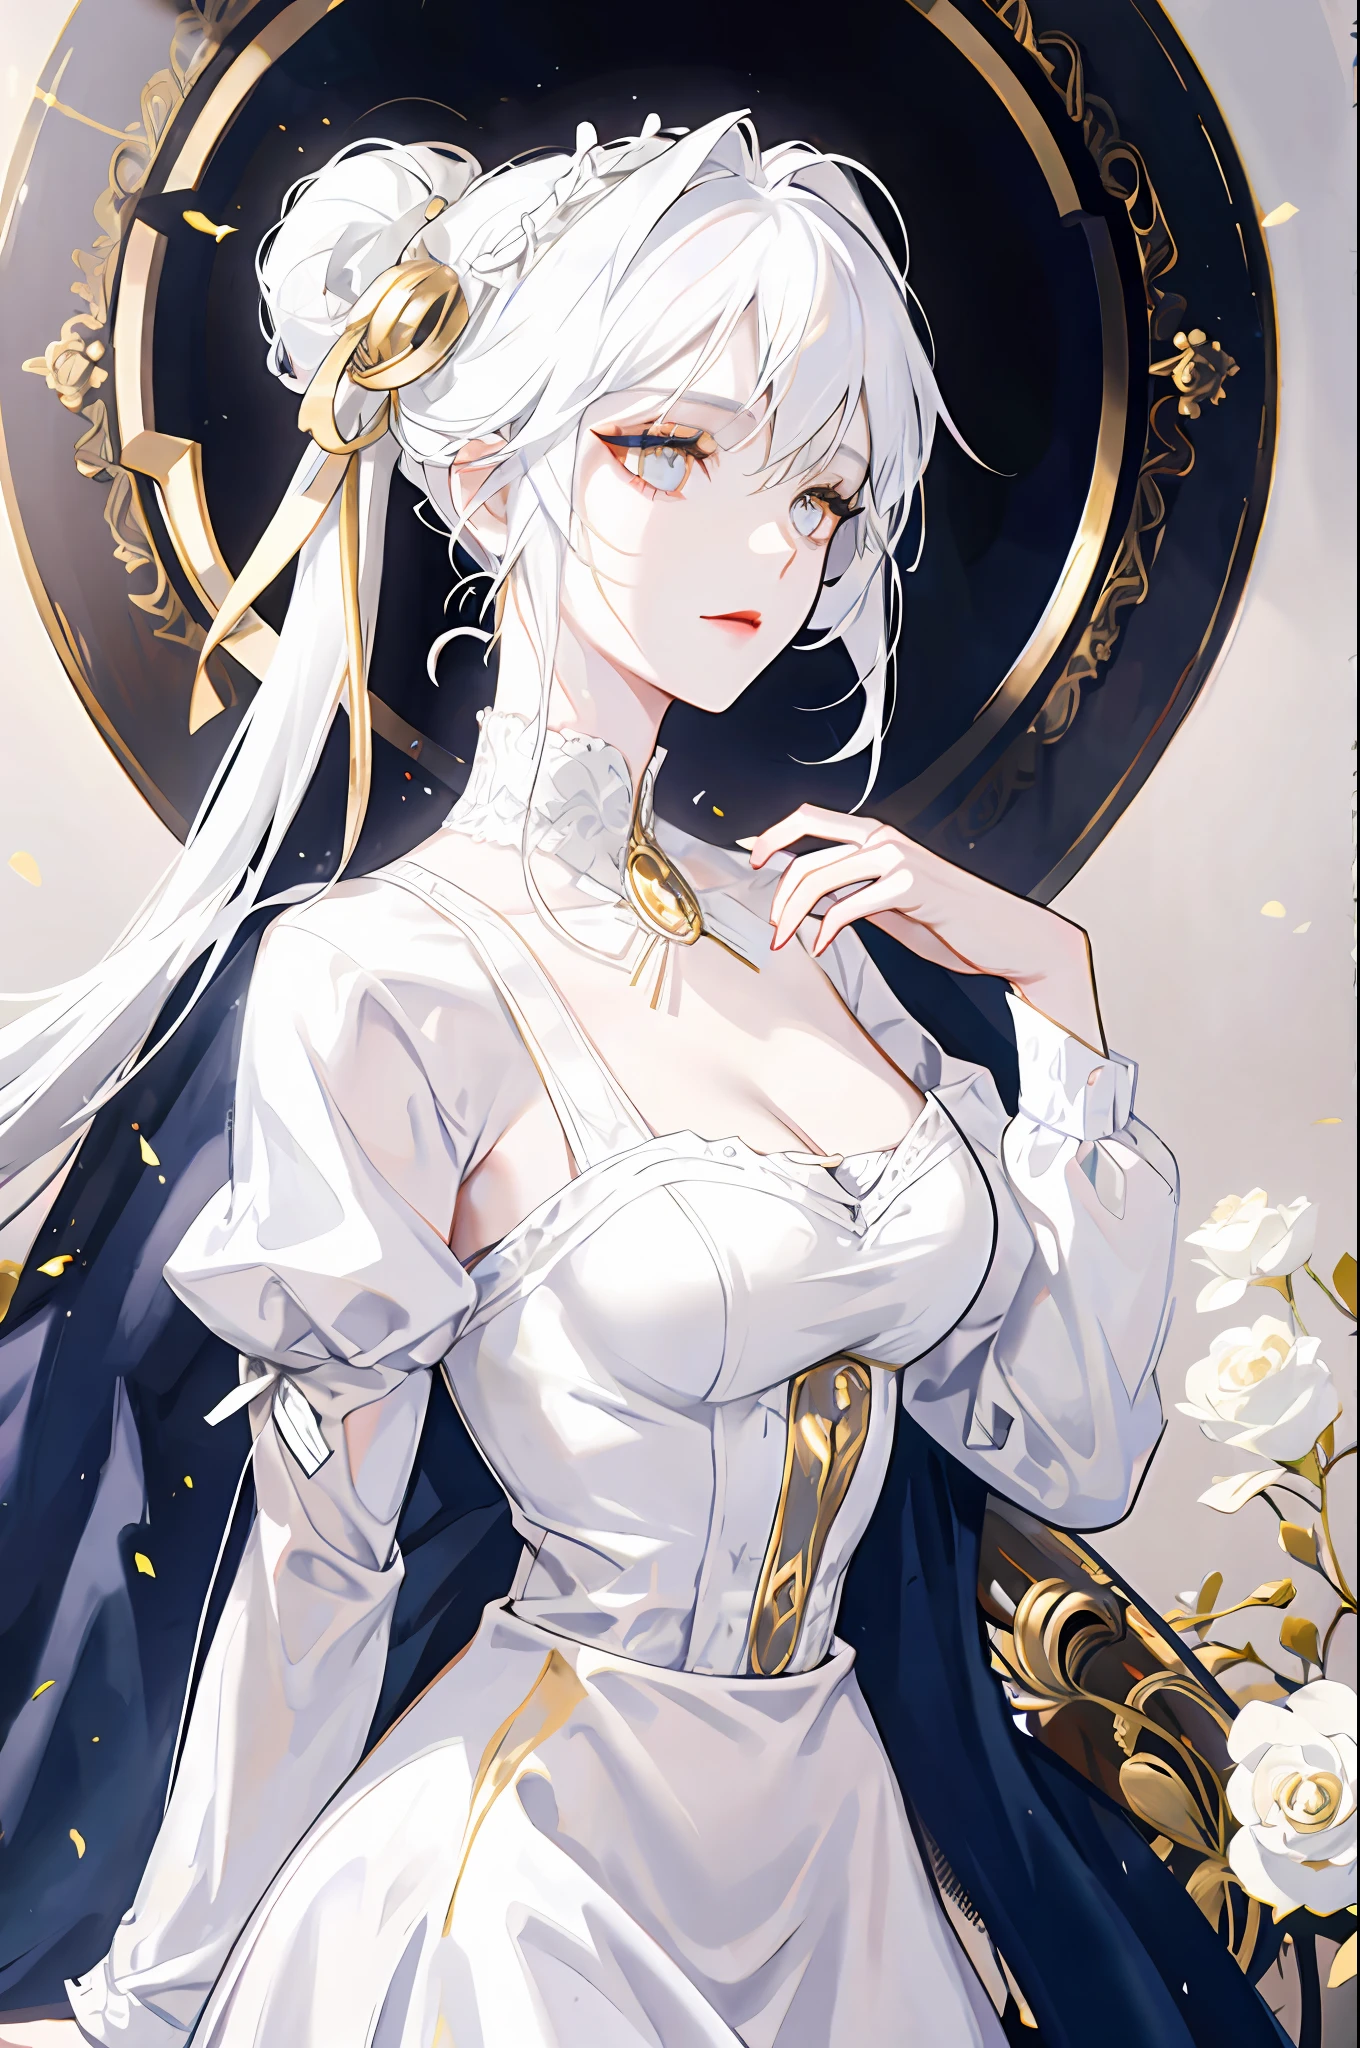 White haired woman, golden eyes, white victorian dress, white skin, elegant, royalty, young woman, alone, mature, beautiful